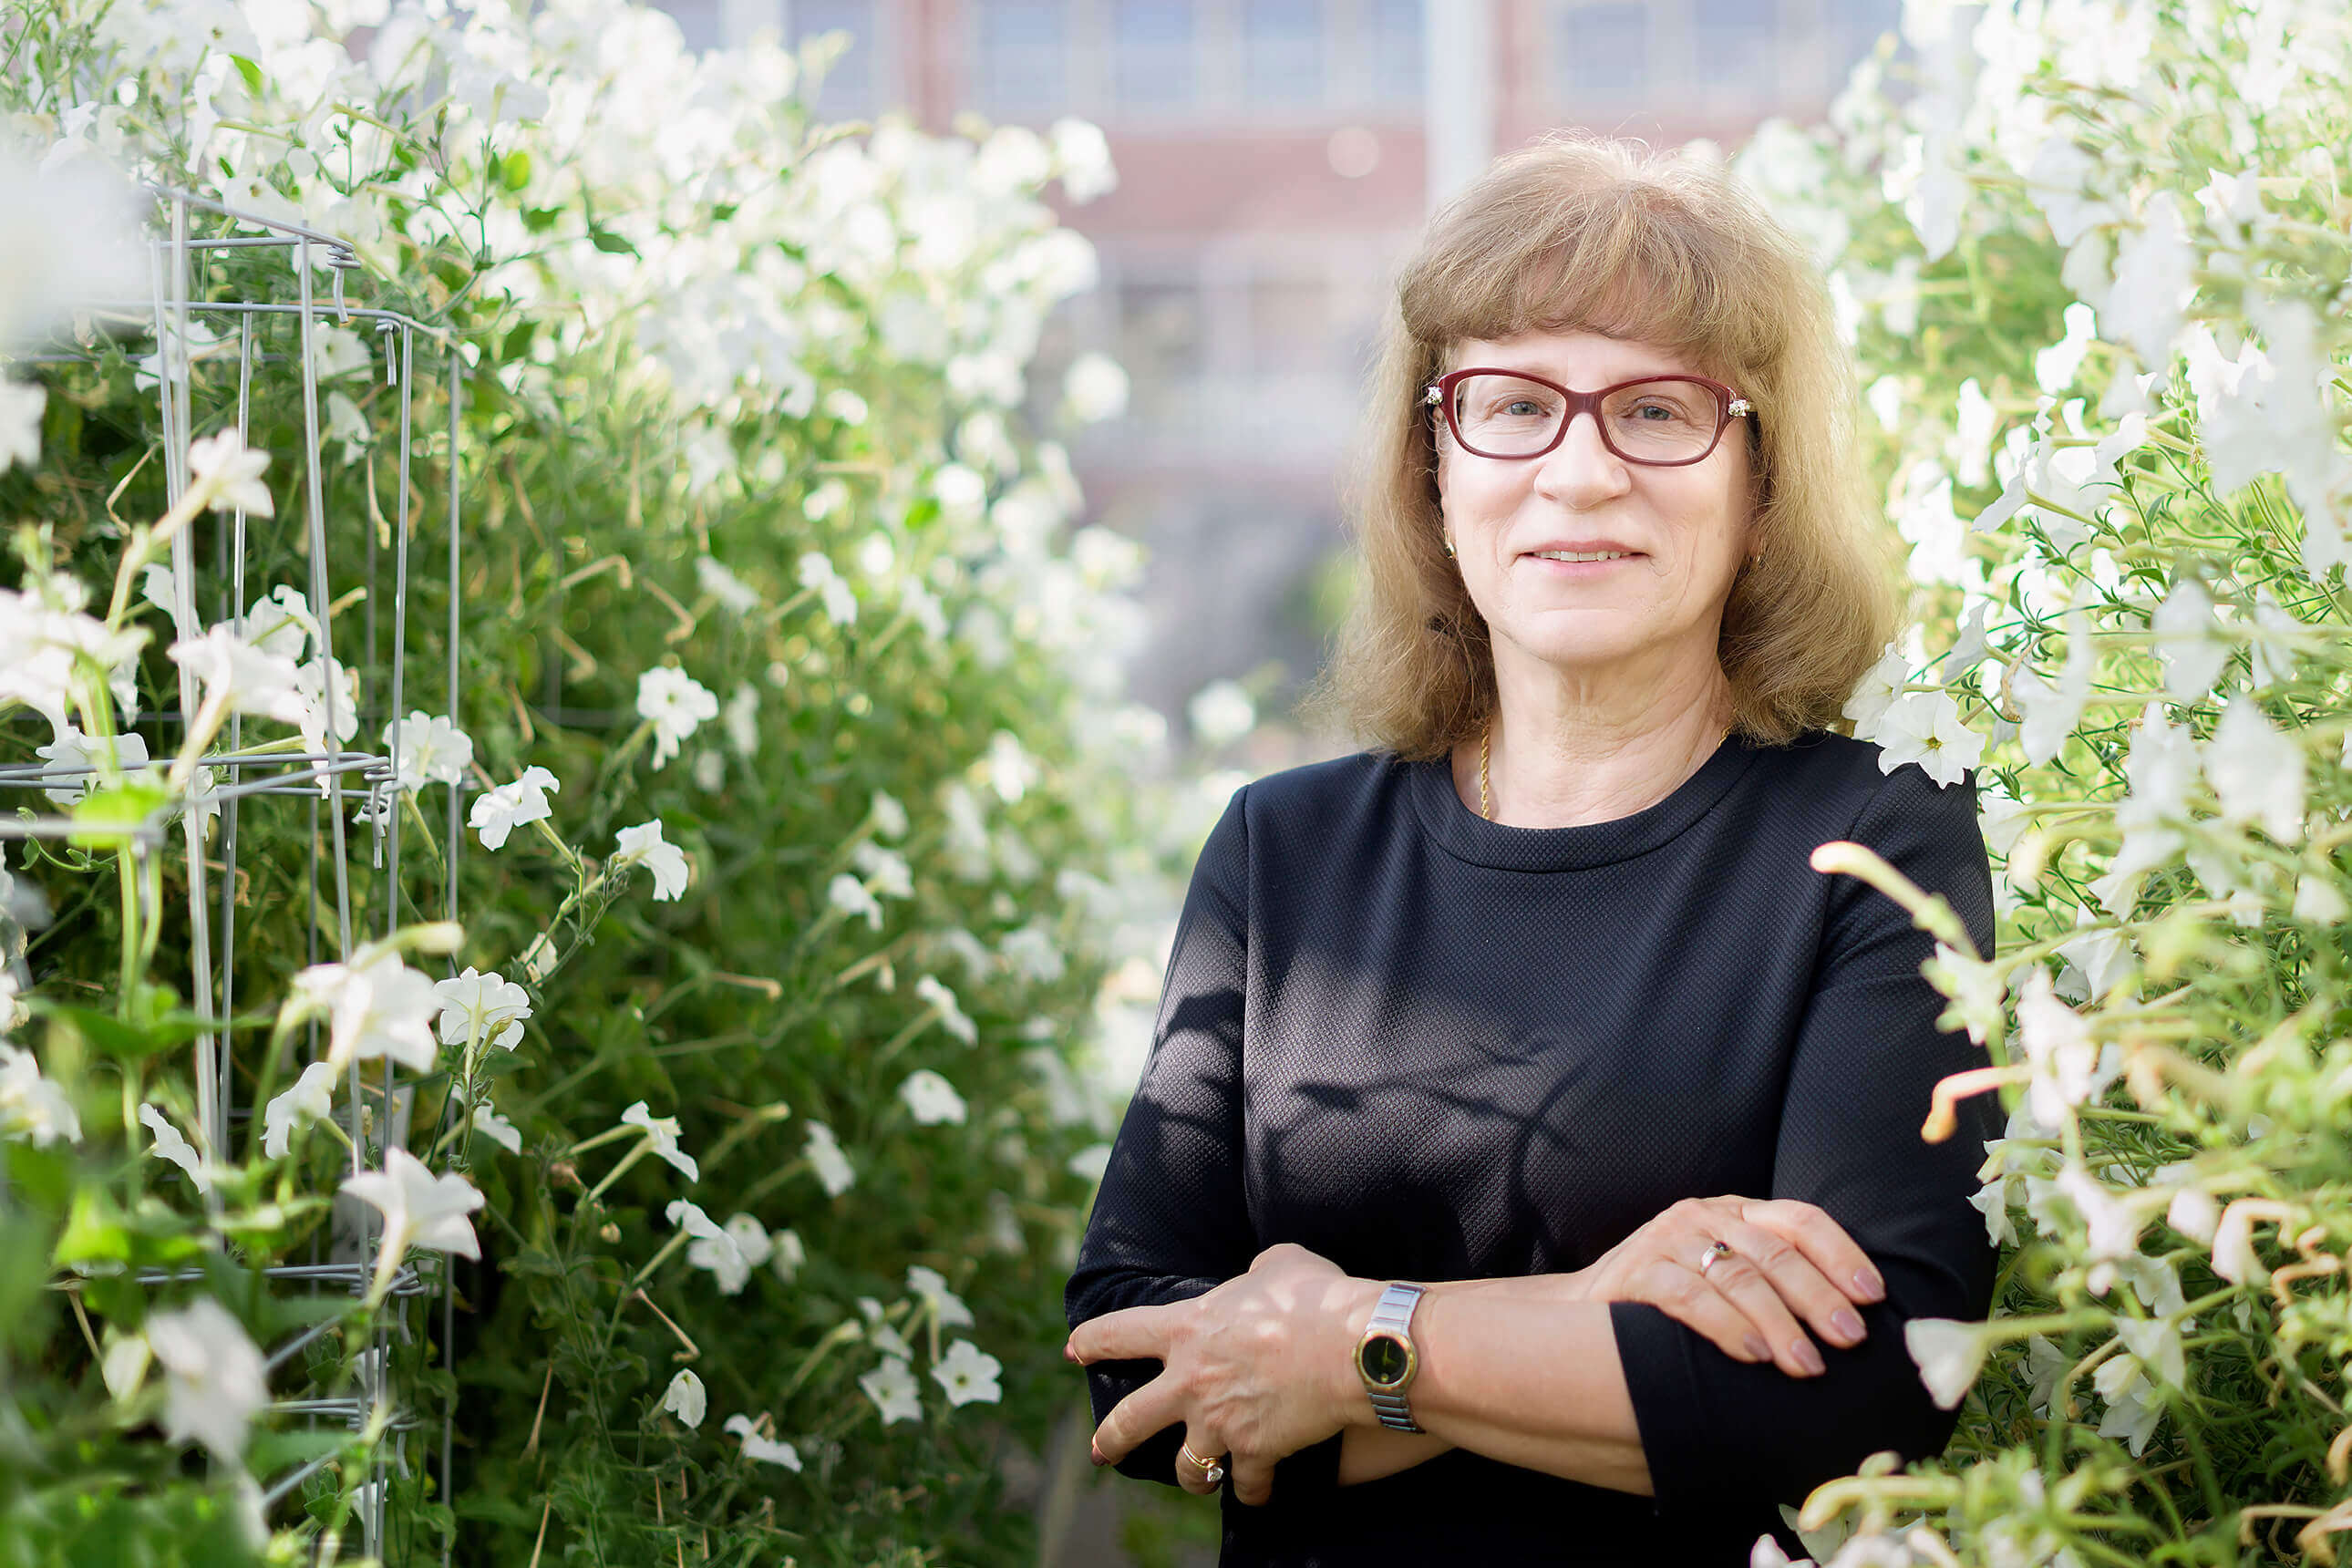 Natalia Dudareva has uncovered the switches that control terpenoid production in plants. The findings may lead to methods for increasing production of the compounds that have a wide range of uses, from fragrances and flavorings to biofuels and pharmaceuticals.